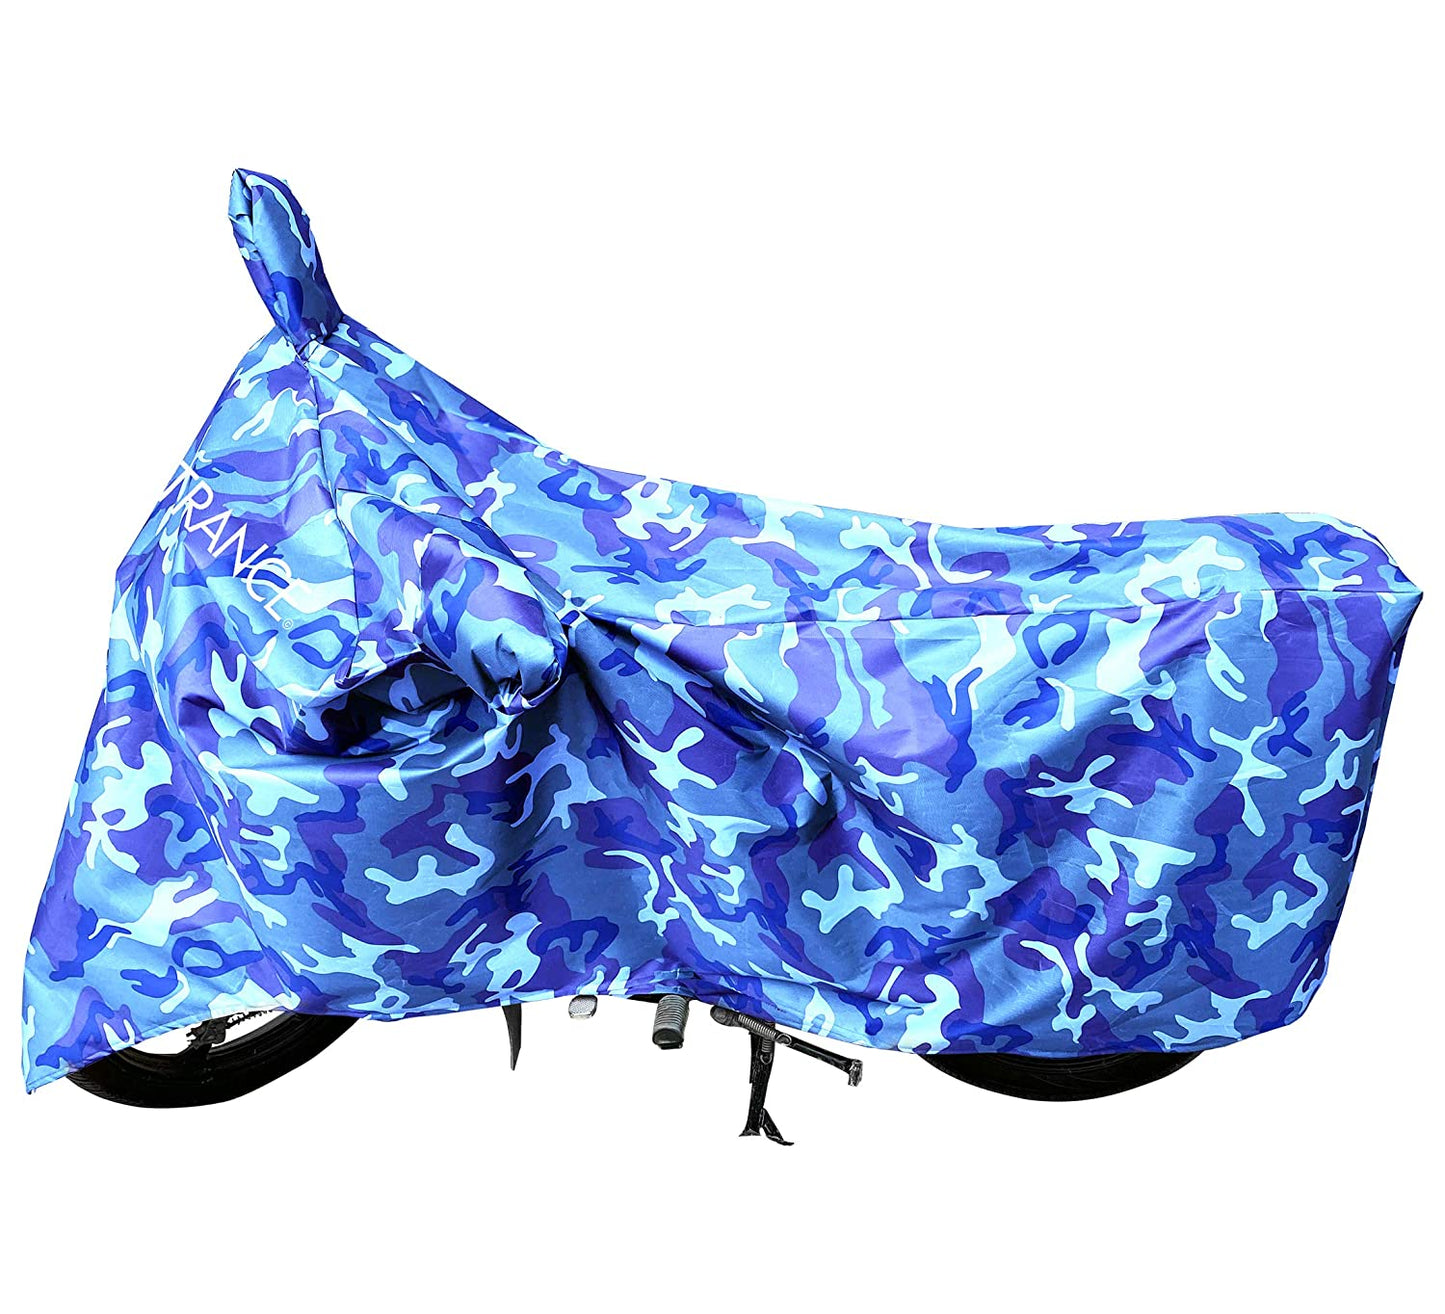 MotoTrance Jungle Bike Body Covers For Kawasaki Versys 1000 - Interlock-Stitched Waterproof and Heat Resistant with Mirror Pockets